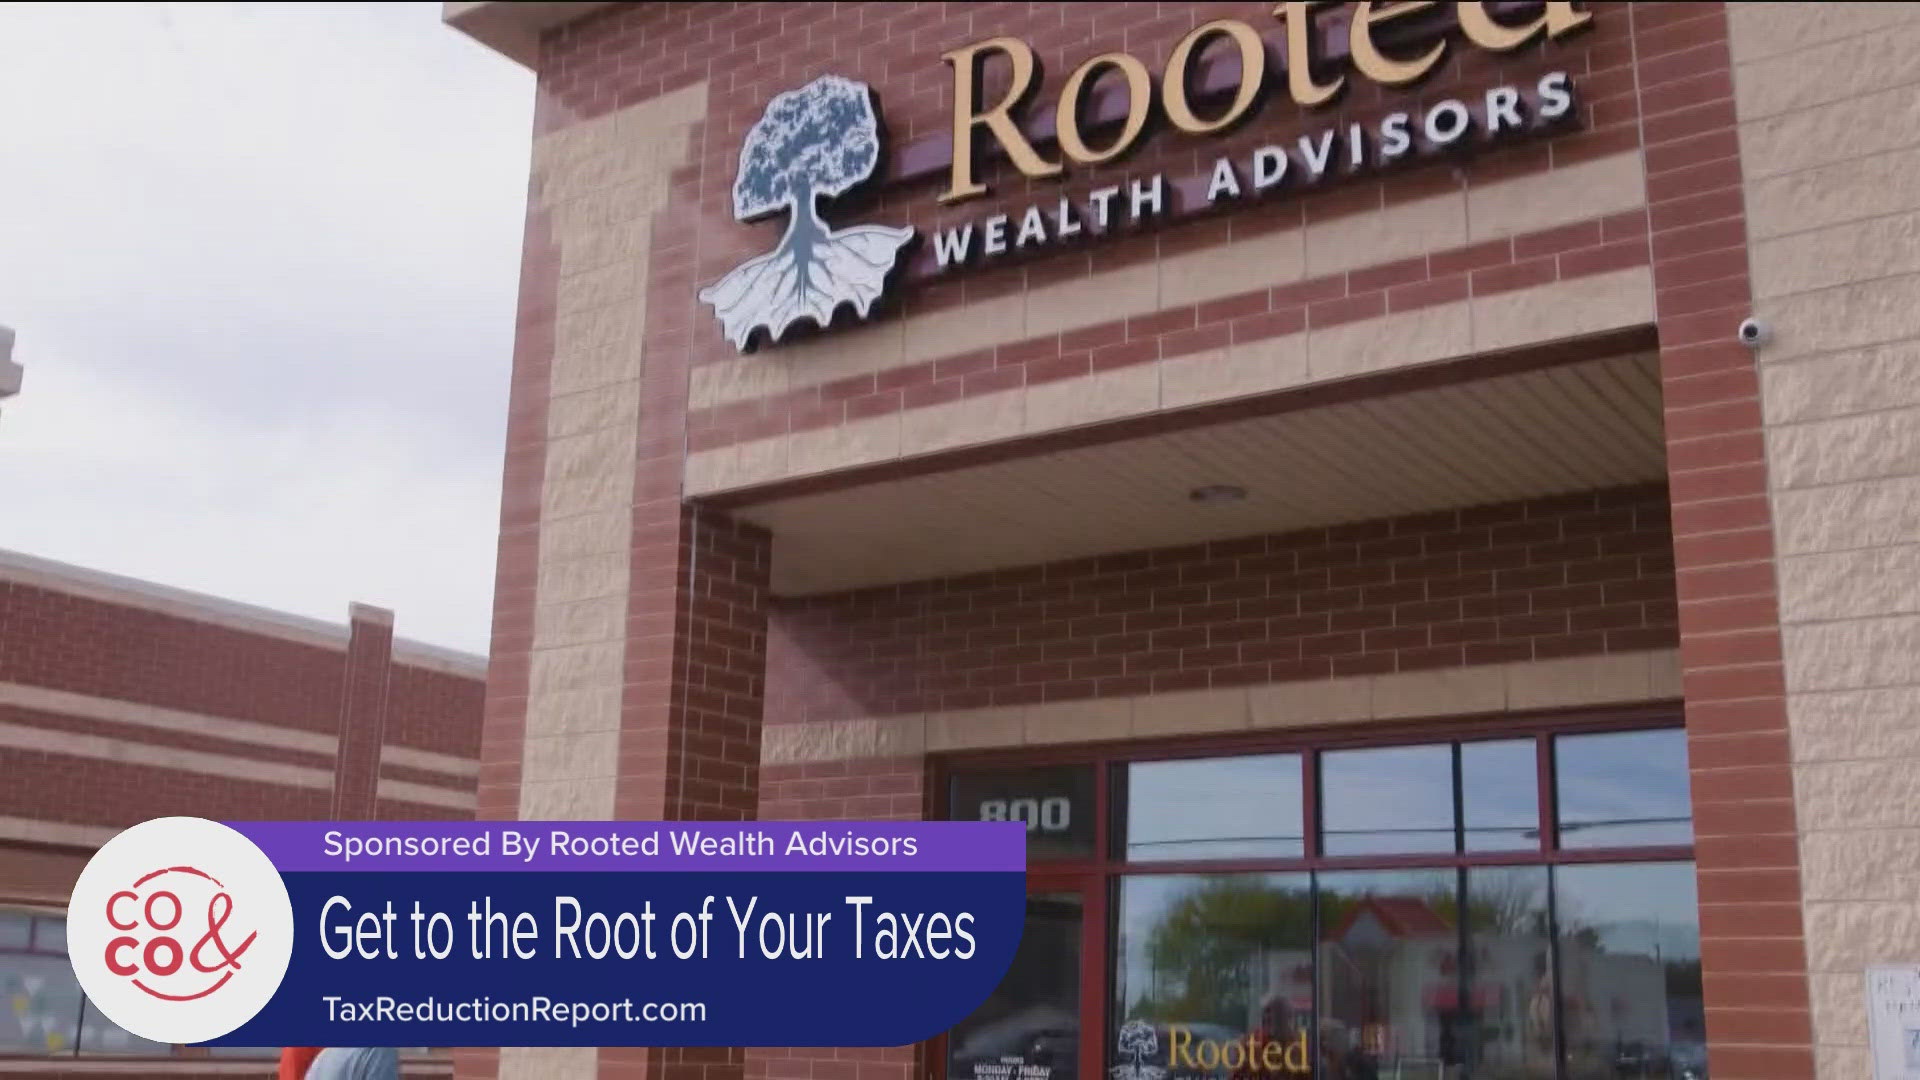 If you'd like to speak with the team at Rooted Wealth Advisors, call 303-376-7477 or visit them at RootedRetirement.com.  **PAID CONTENT**